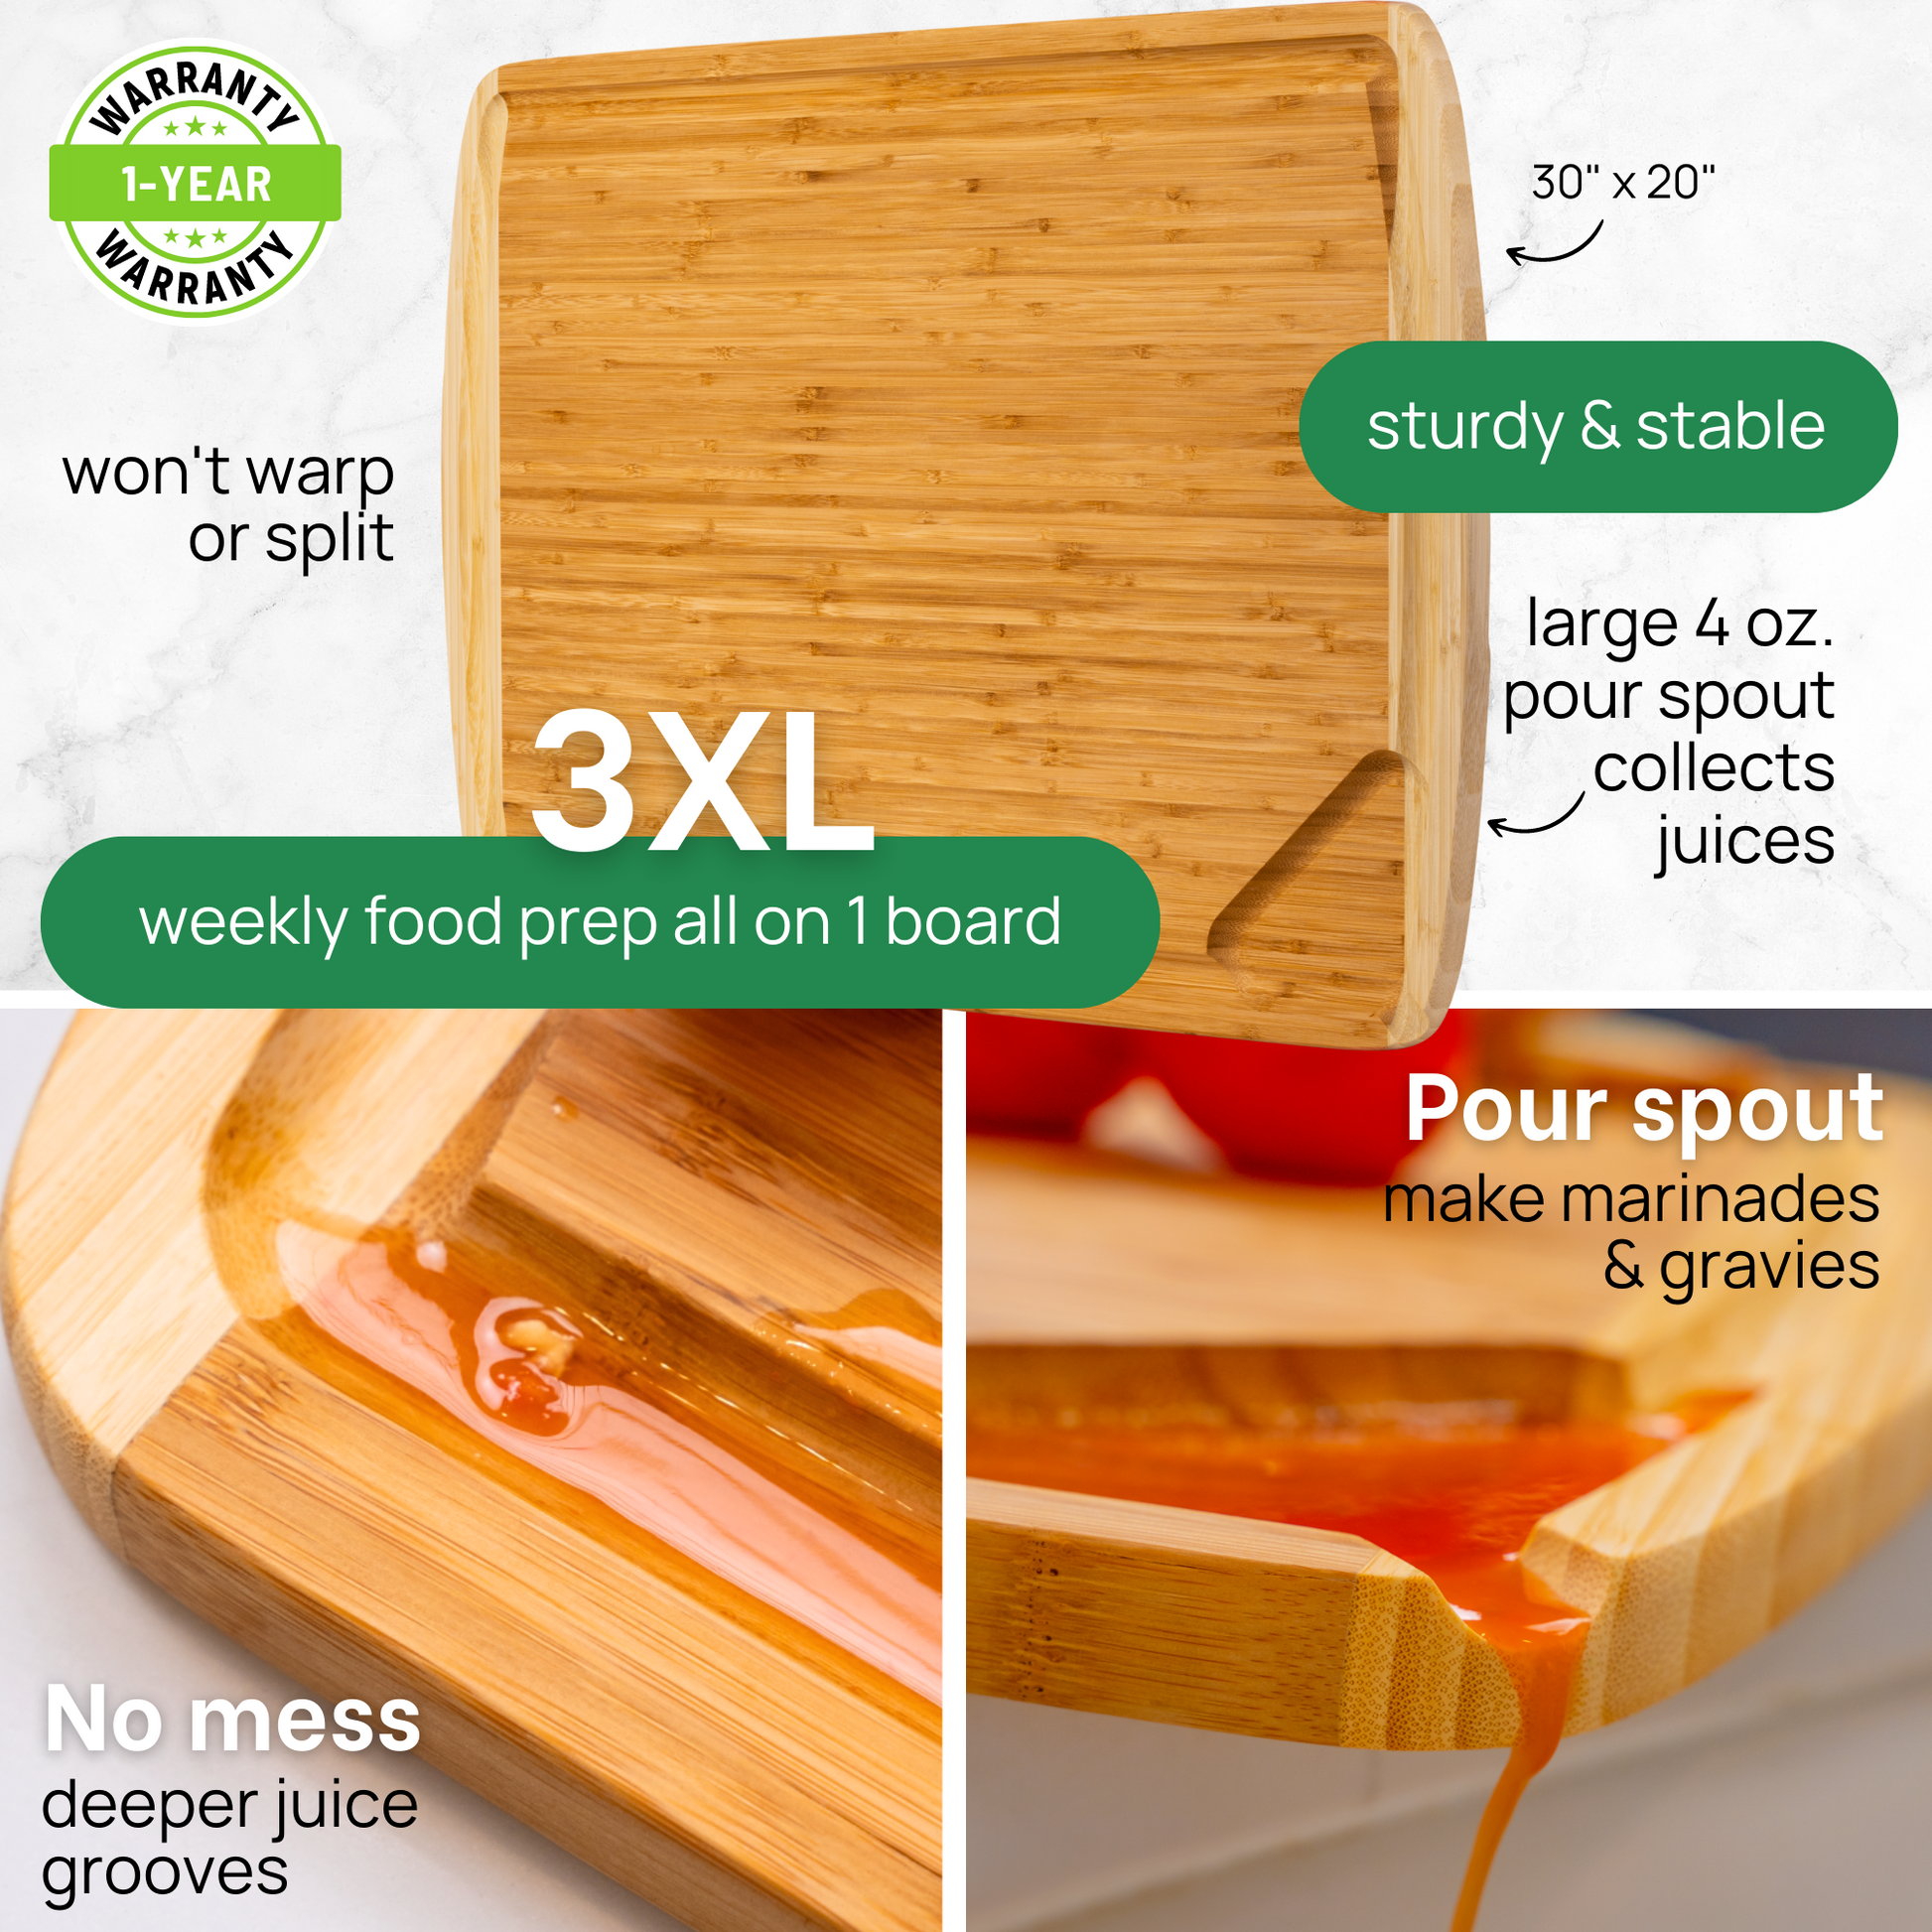  GREENER CHEF 18 Inch Extra Large Bamboo Cutting Board with  Lifetime Replacements - Wood XL Cutting Boards for Kitchen - Organic Wooden  Butcher Block and Chopping Board for Meat and Vegetables